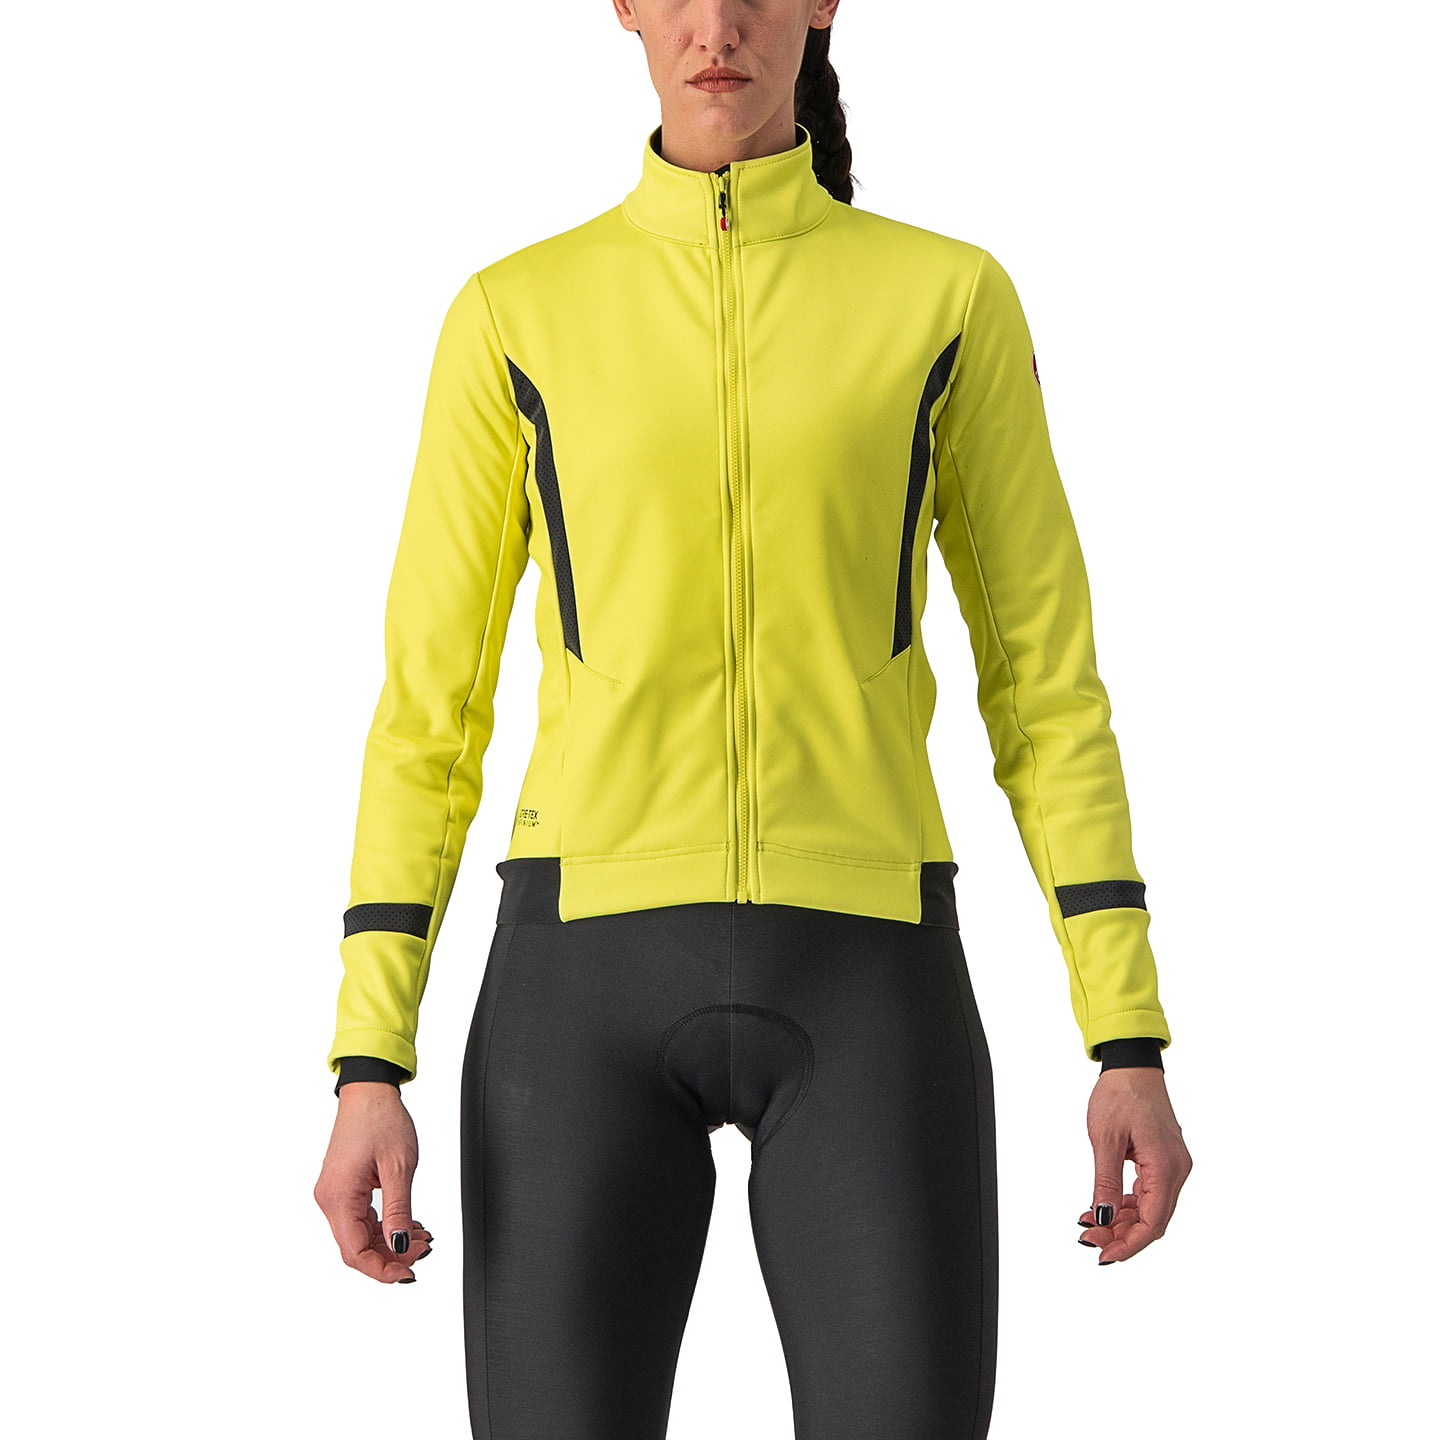 CASTELLI Dinamica 2 Women’s Winter Jacket Women’s Thermal Jacket, size S, Winter jacket, Cycle clothing